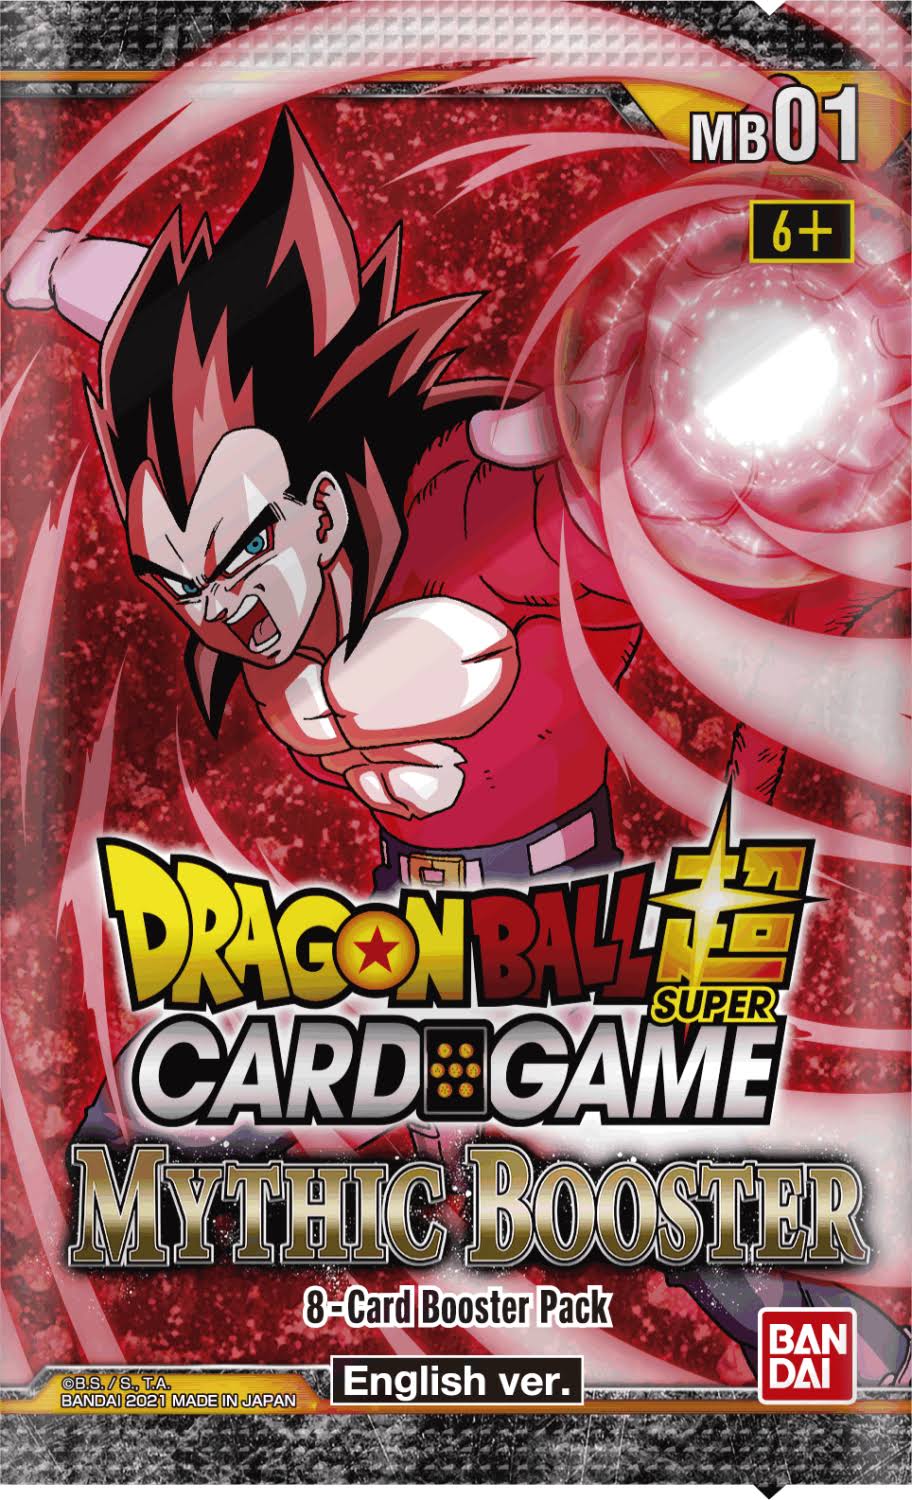 Dragon Ball Super Card Game Mythic Booster Pack